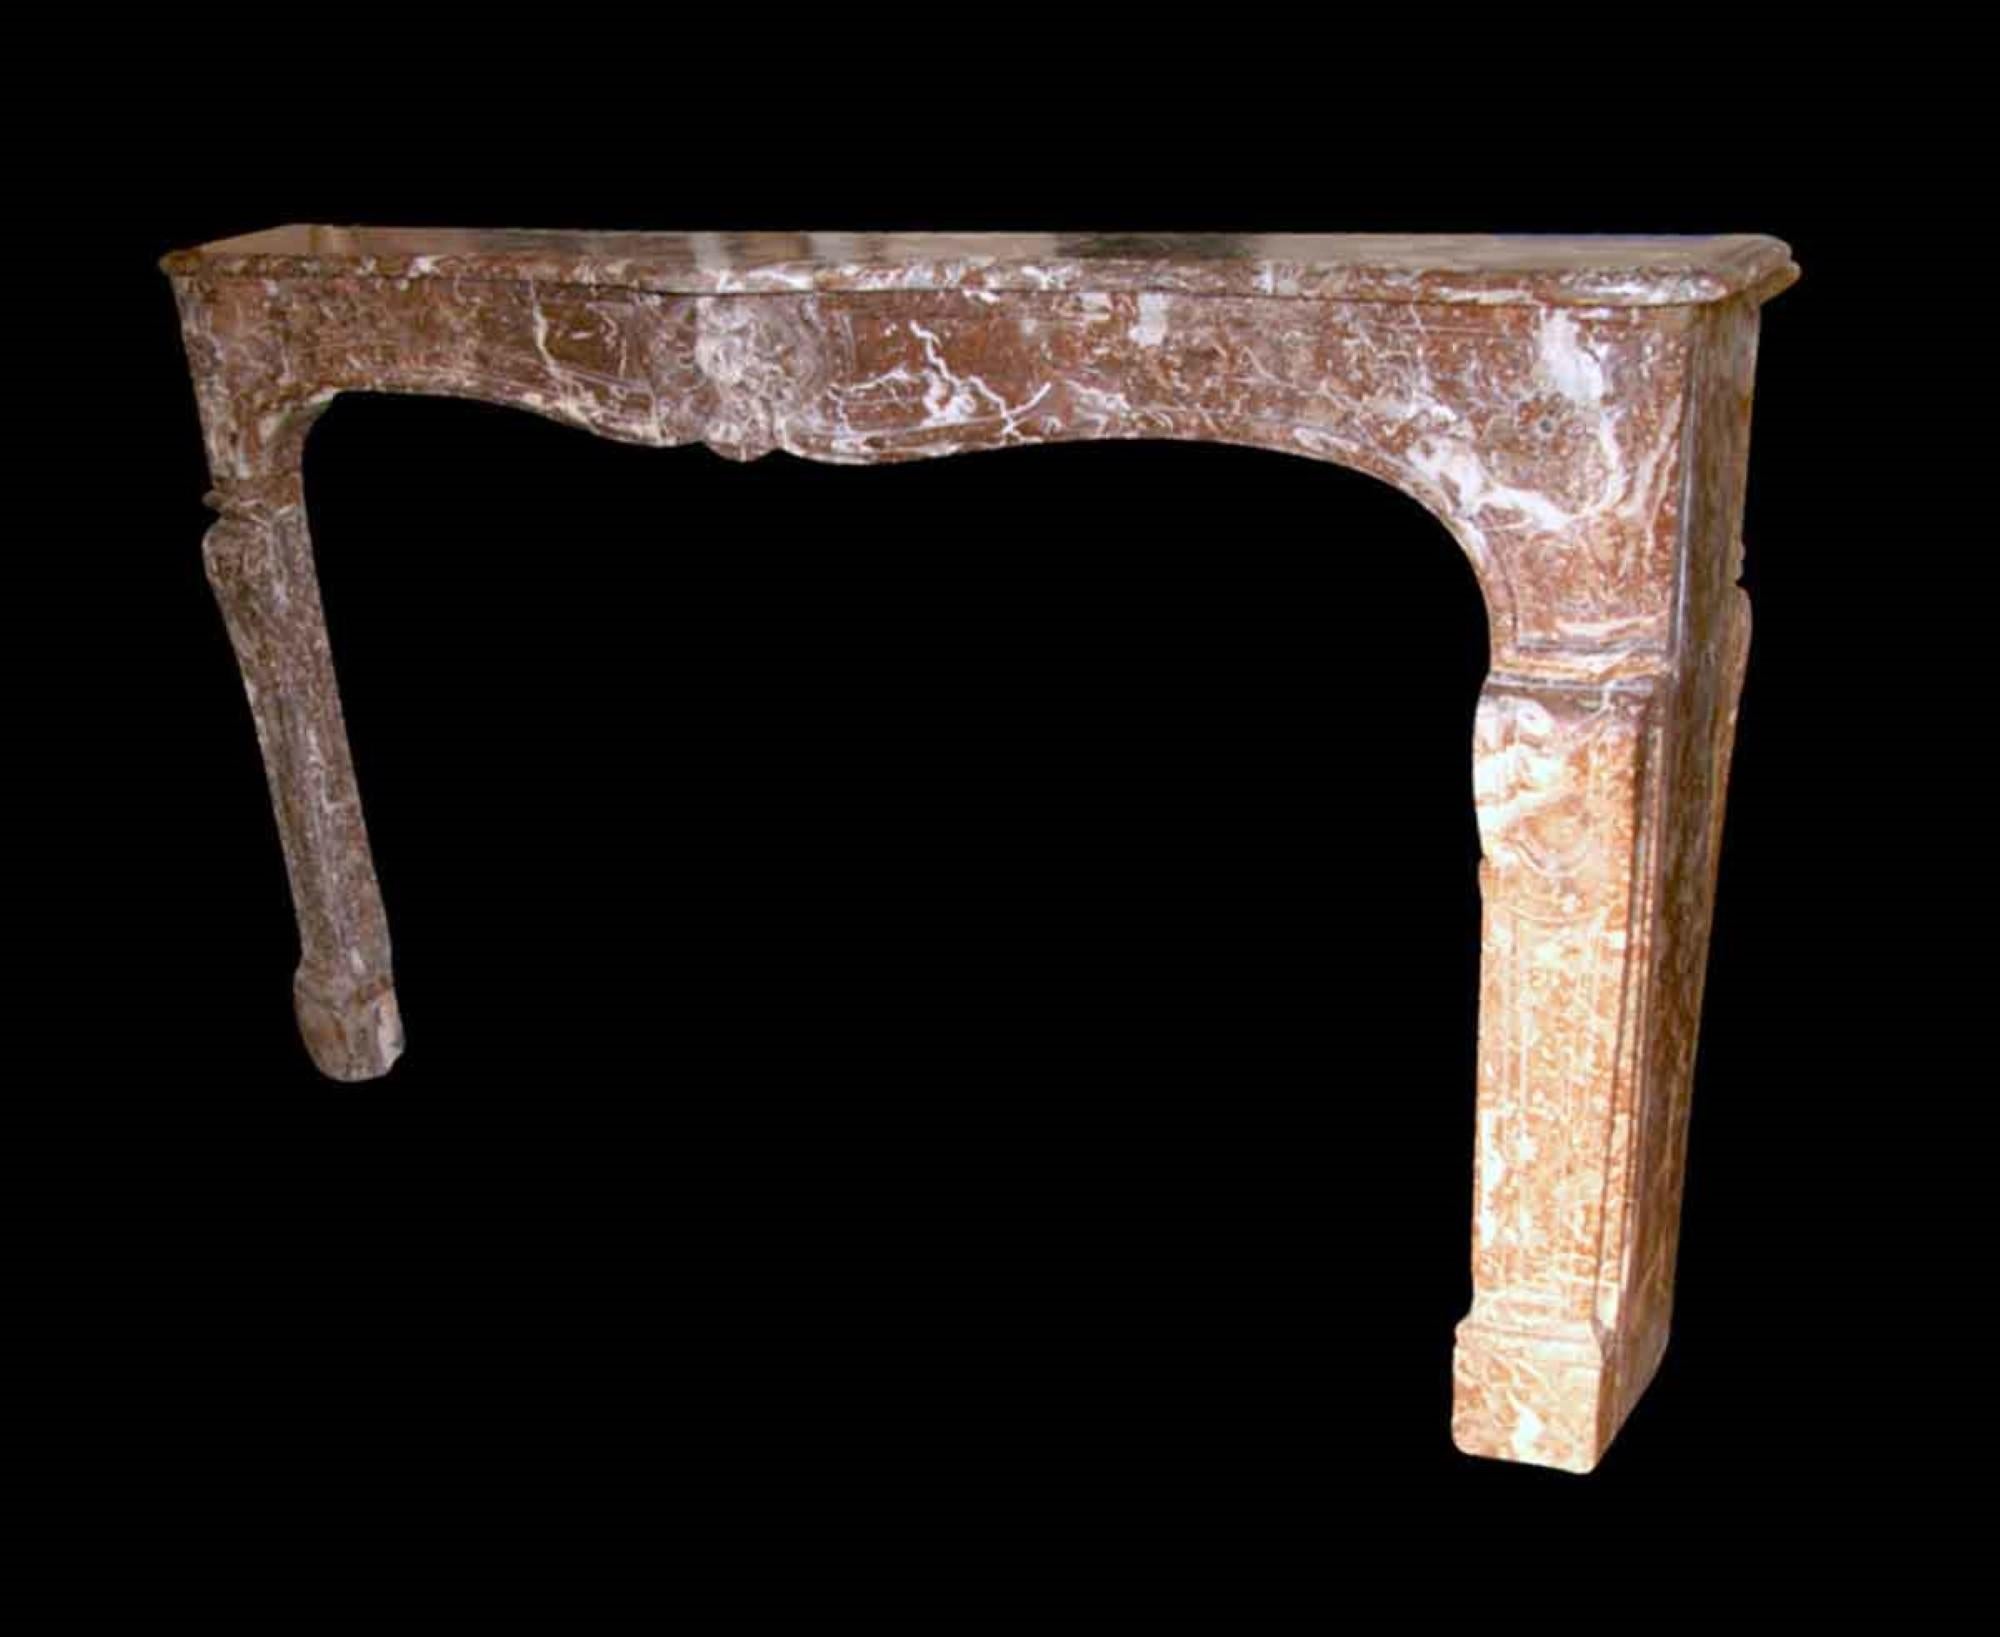 Hand carved French Louis XV period rouge royale marble mantel with flower detail from the 18th century. Several repairs have been don't to the shelf. This is one of many acquisitions from Danny Alessandro & Edwin Jackson mantel company. This can be